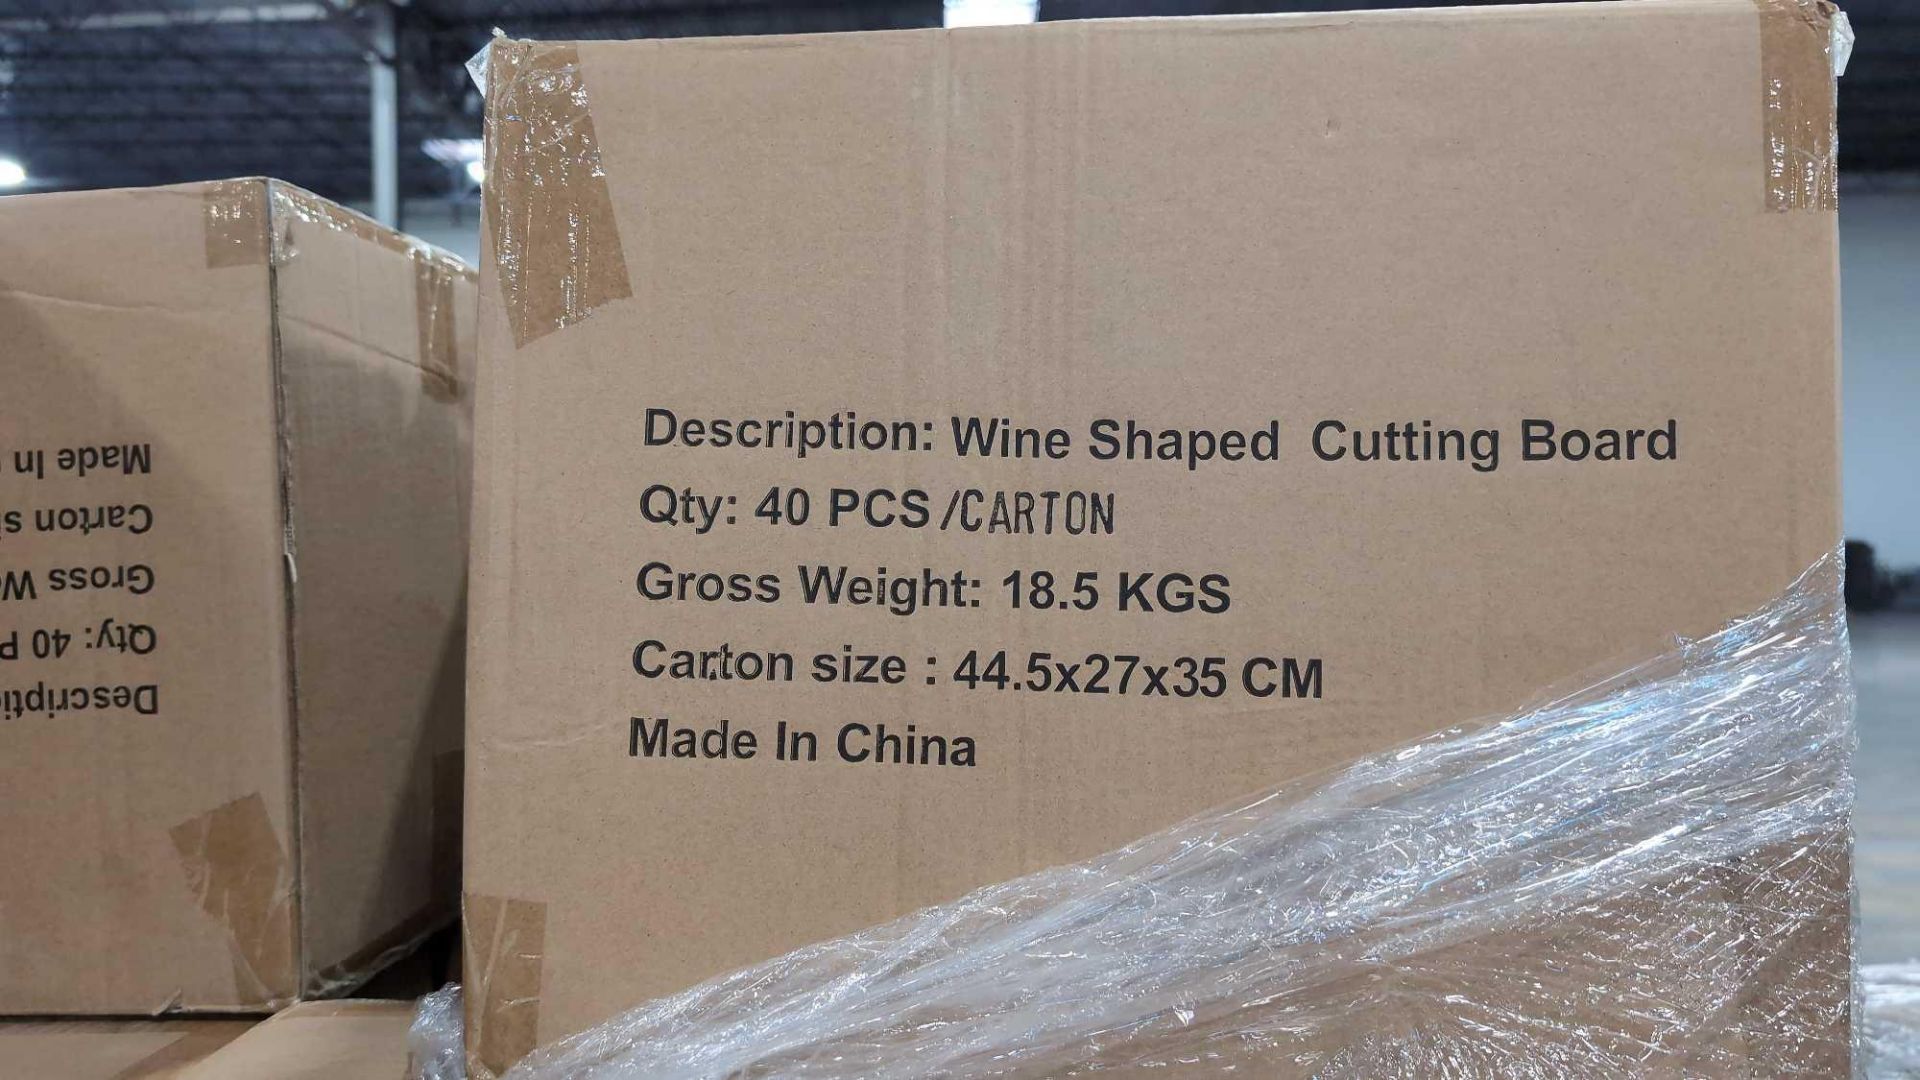 Wine Shaped Cutting Boards - Image 2 of 5